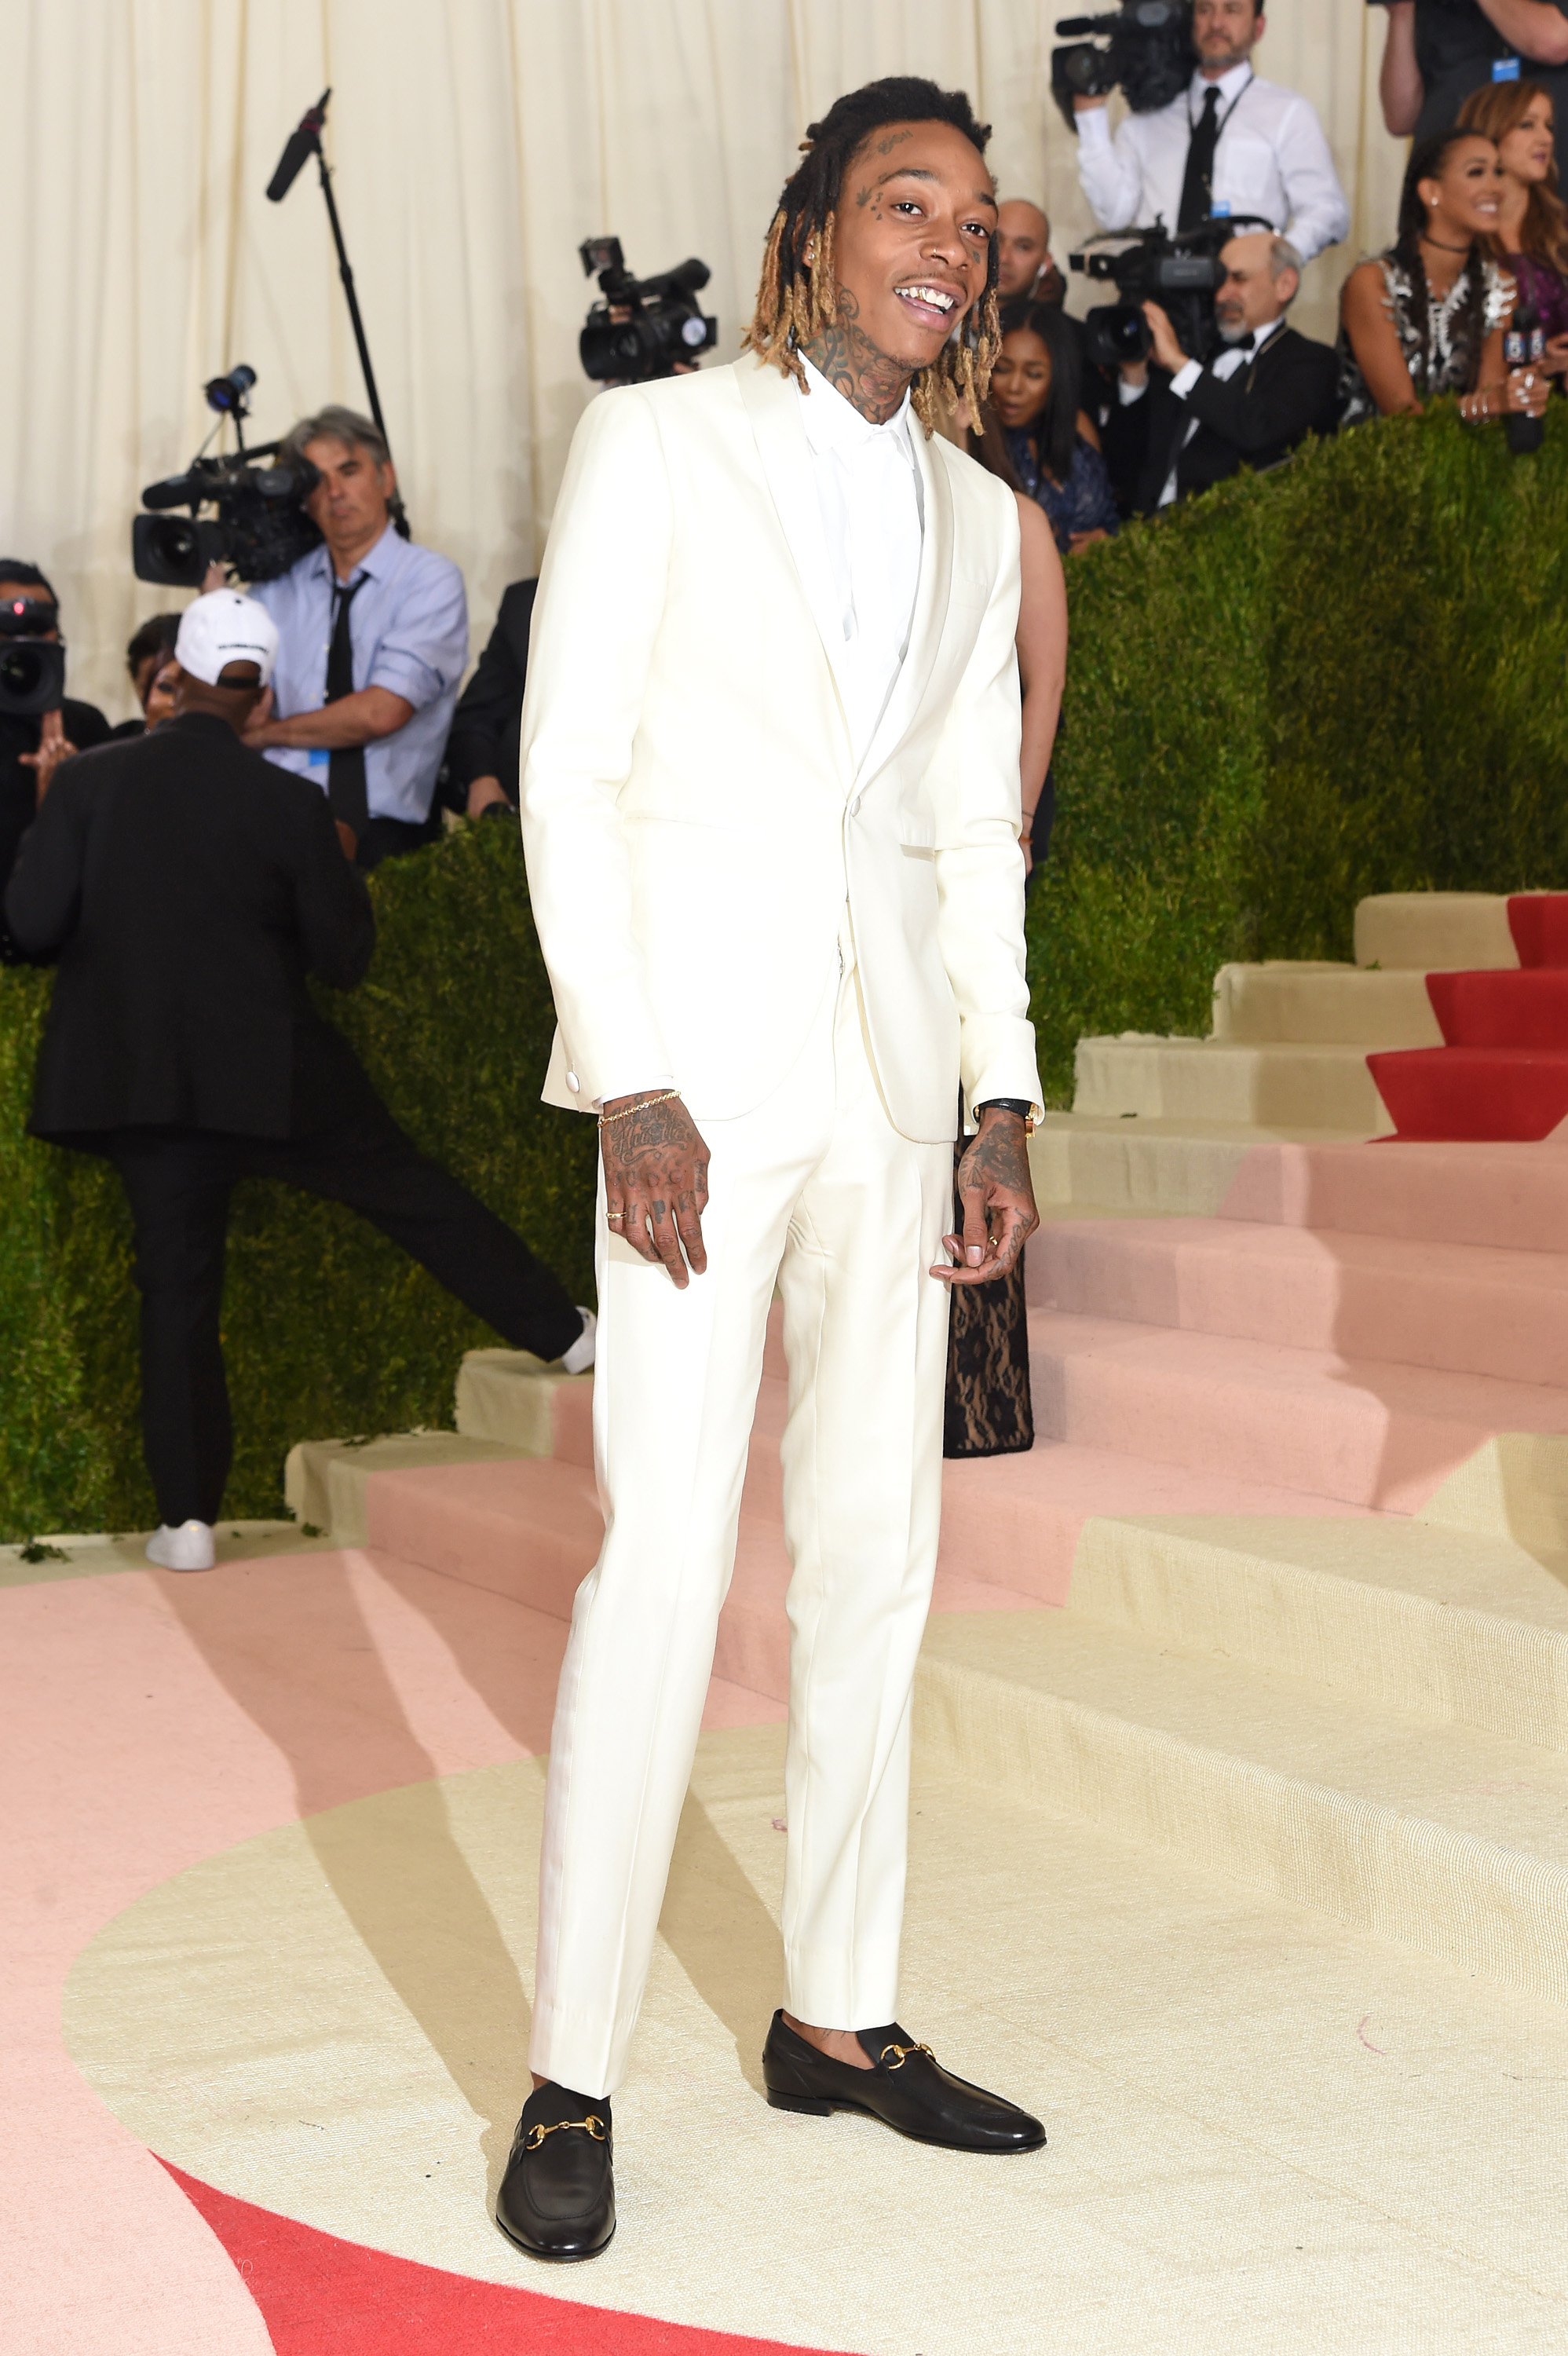 Wiz Khalifa attends "Manus x Machina: Fashion In An Age Of Technology" Costume Institute Gala at Metropolitan Museum of Art on May 2, 2016 in New York City.